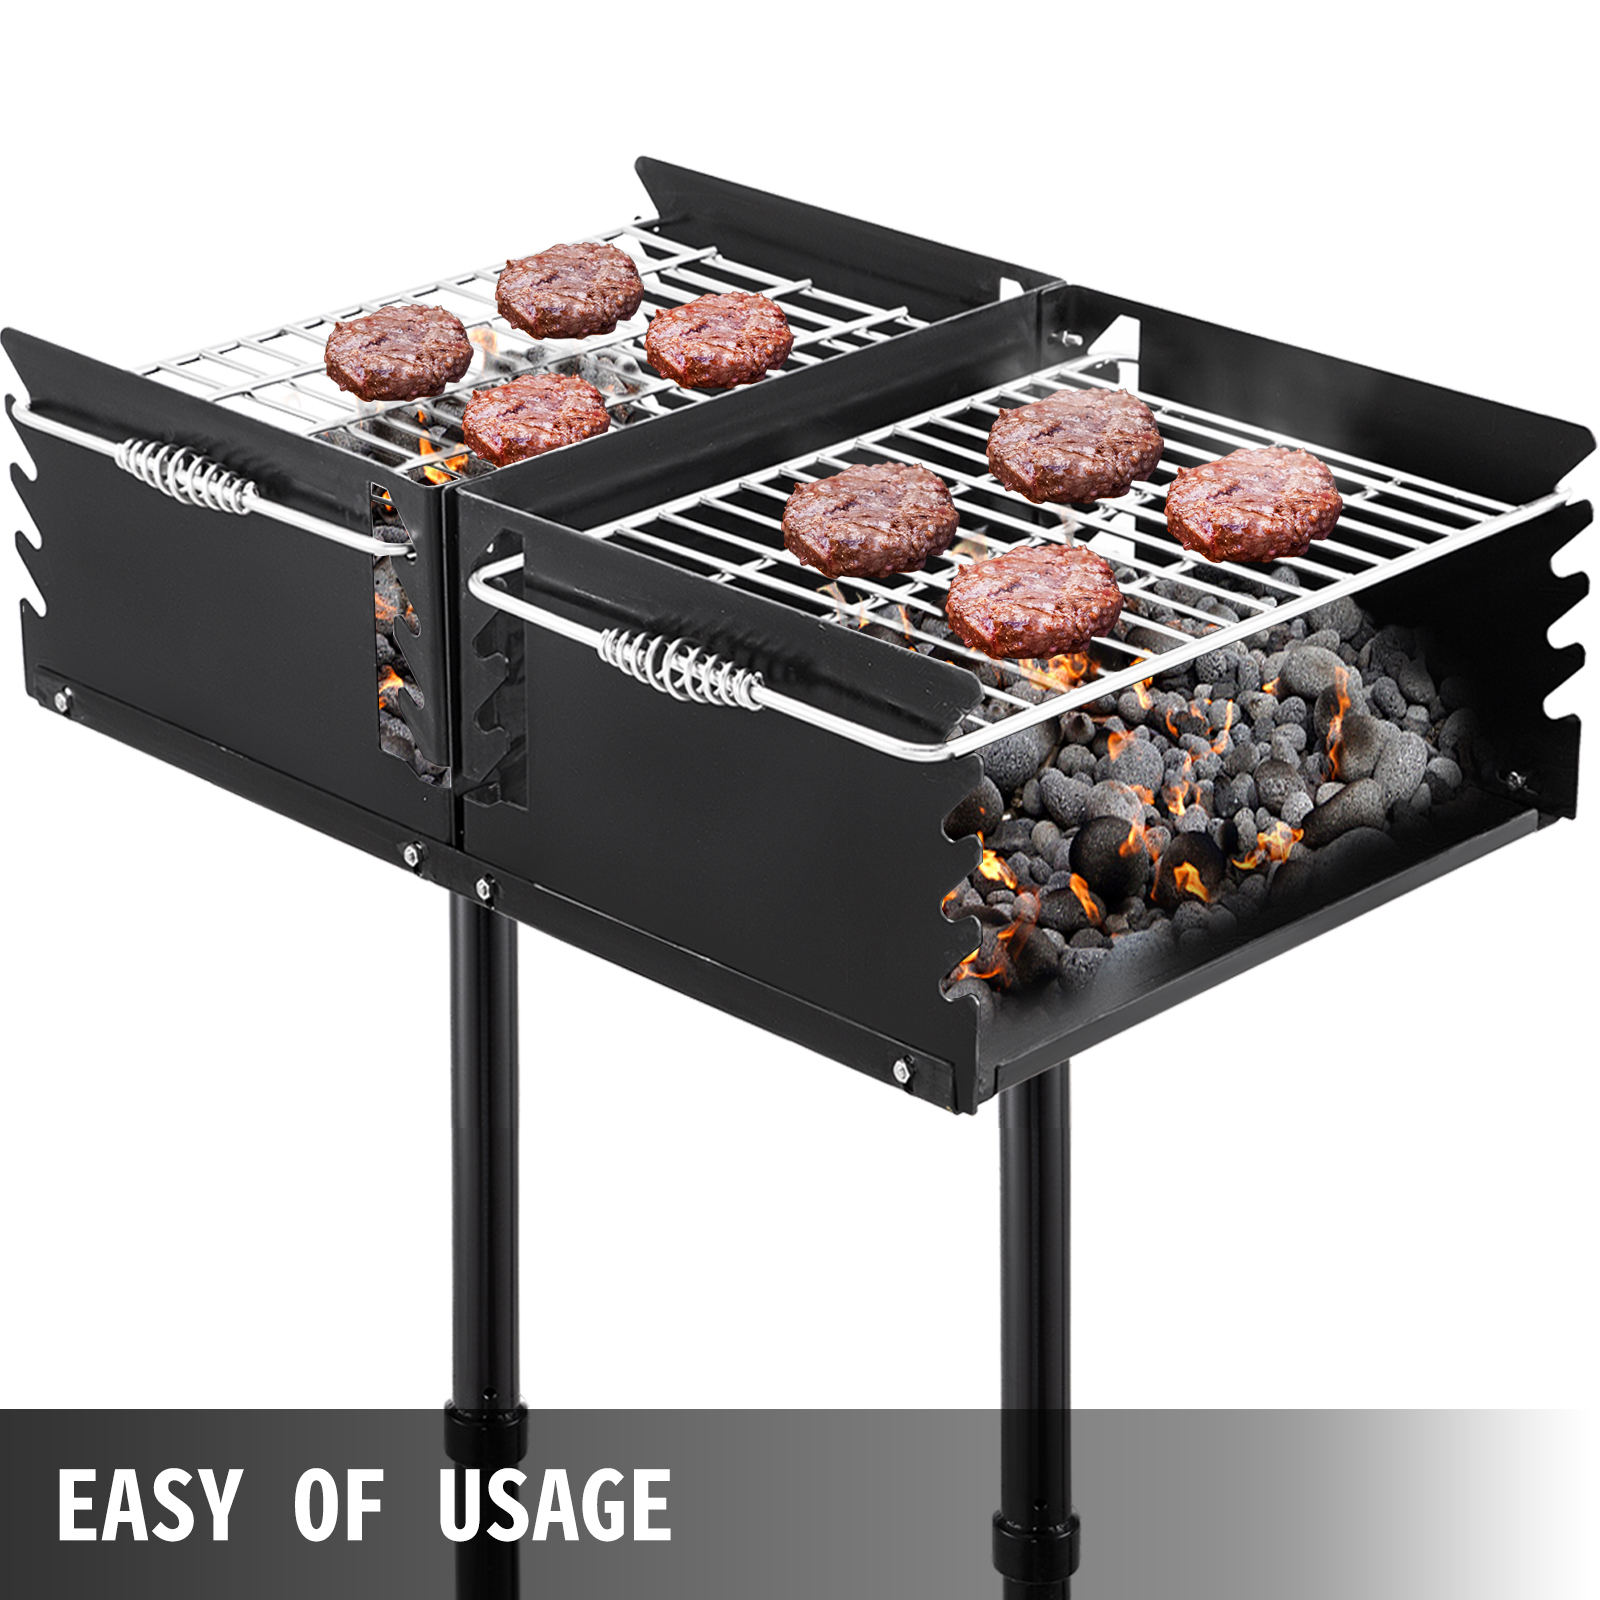 VEVOR Outdoor Park Style Grill 24 x 16 Inch Park Style Charcoal Grill  Carbon Steel Park Style BBQ Grill Height 50-in Adjustable Charcoal Grill  with